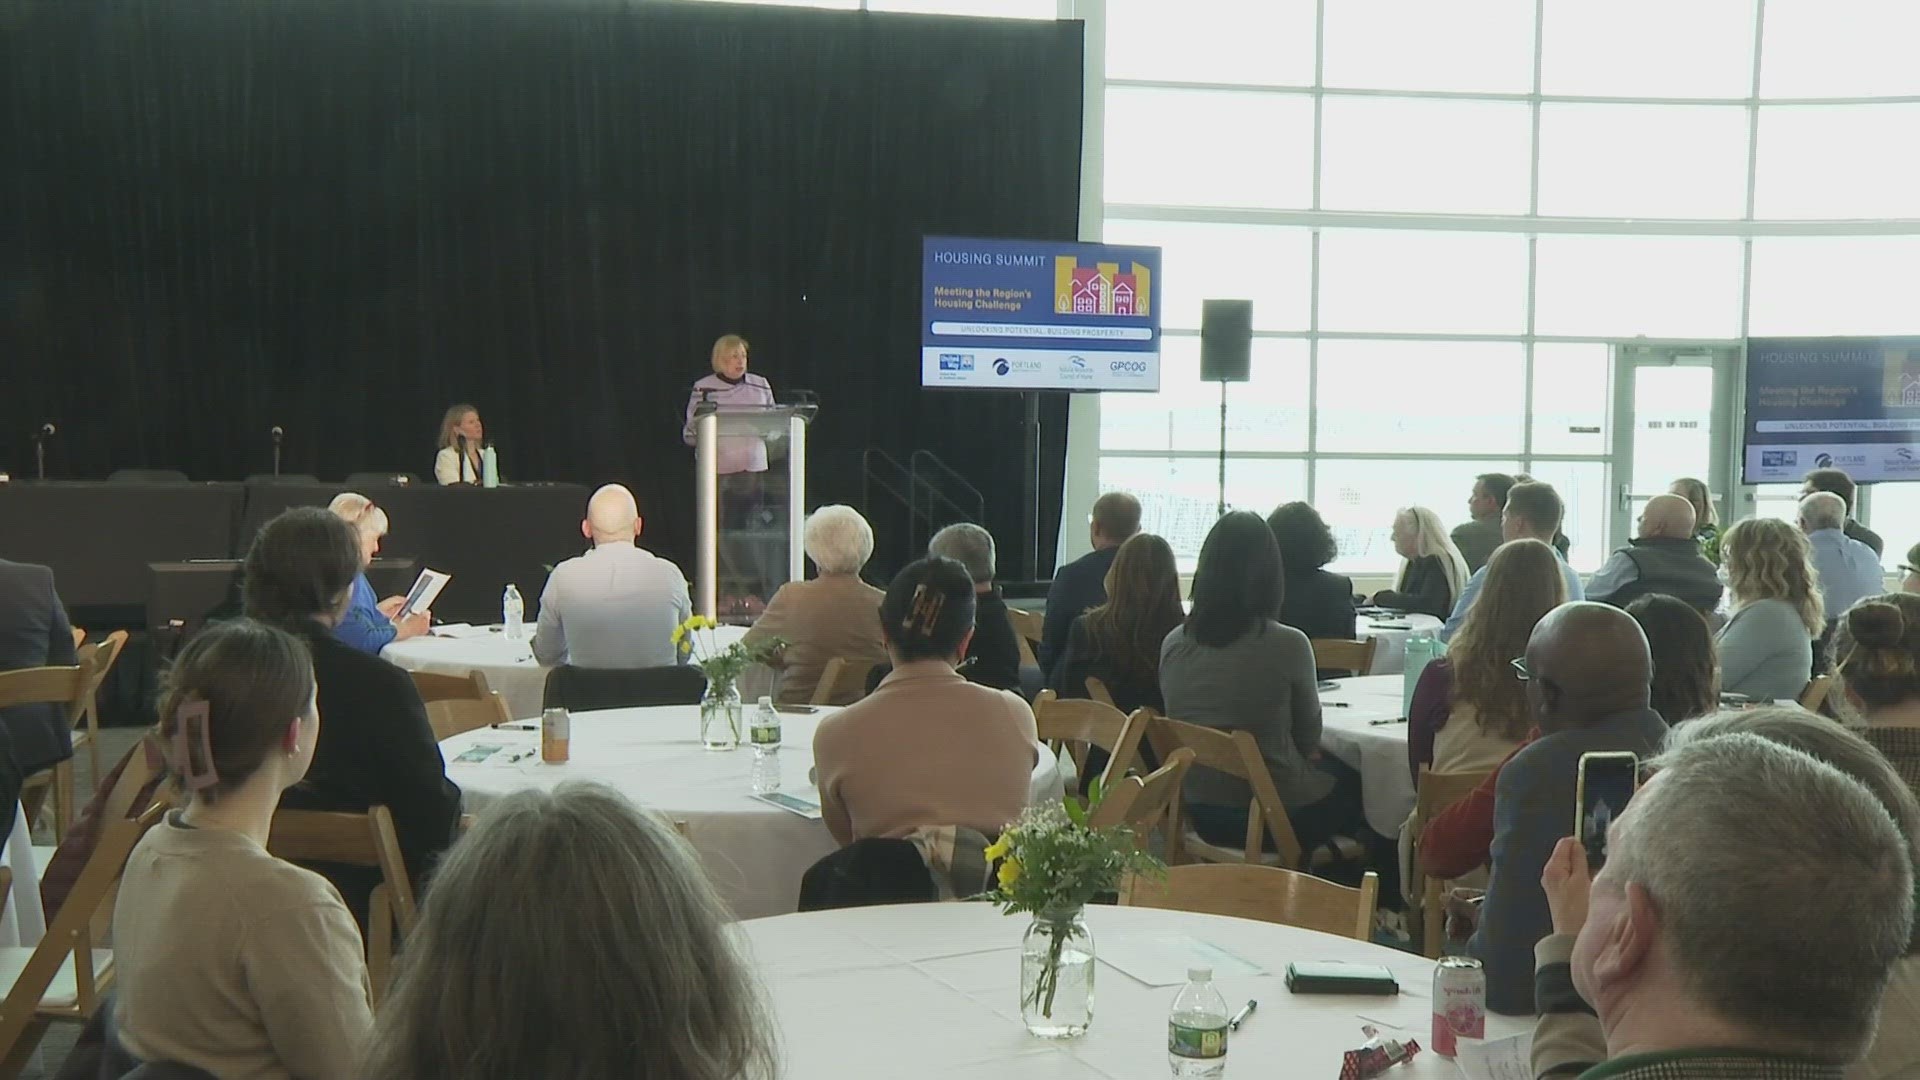 Gov. Janet Mills spoke about the plan at a housing summit in Portland put on by the Greater Portland Council of Governments.